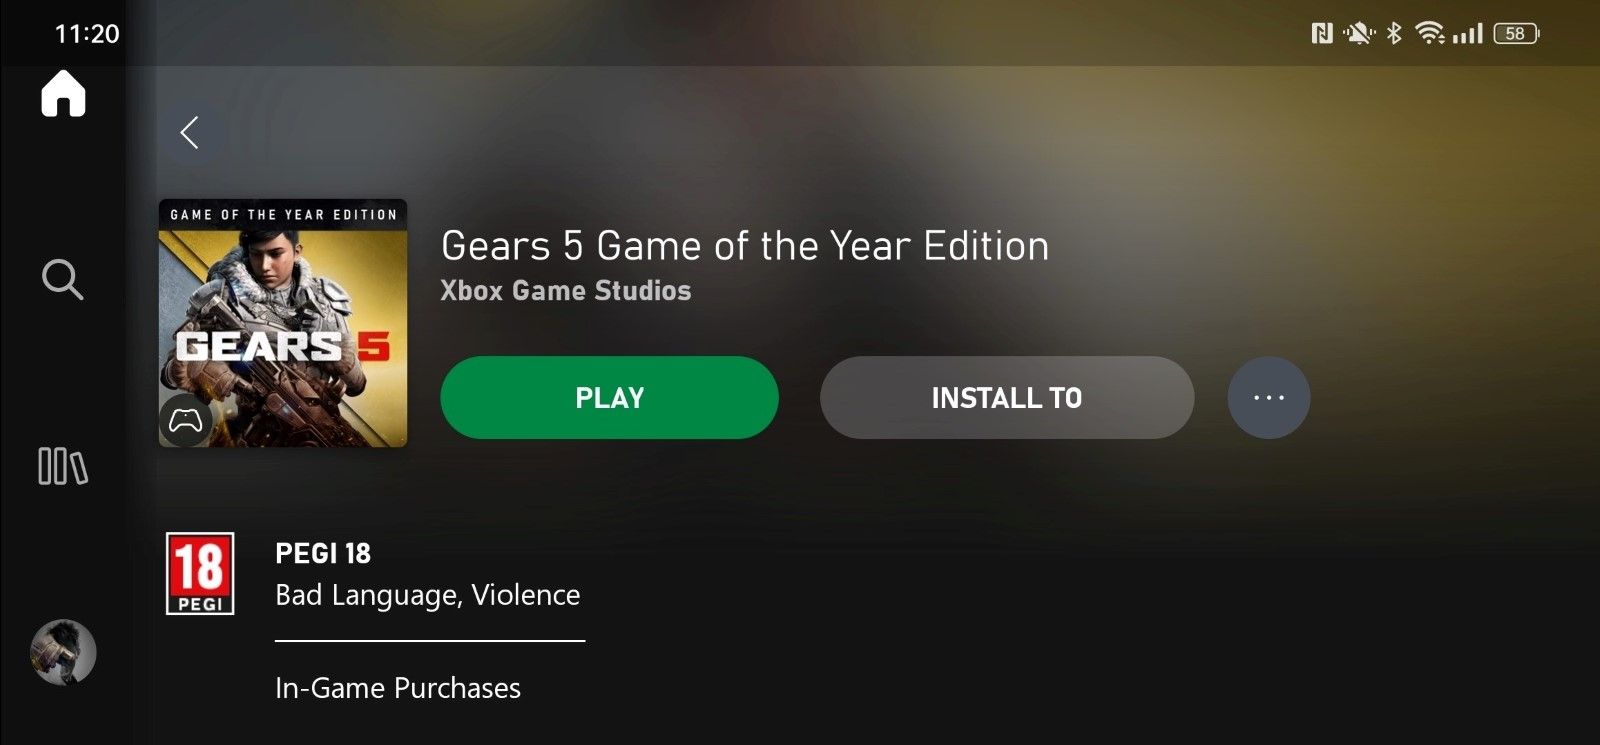 A screenshot of the Xbox Game Pass app on mobile highlighting the Gears 5 Year Game release list